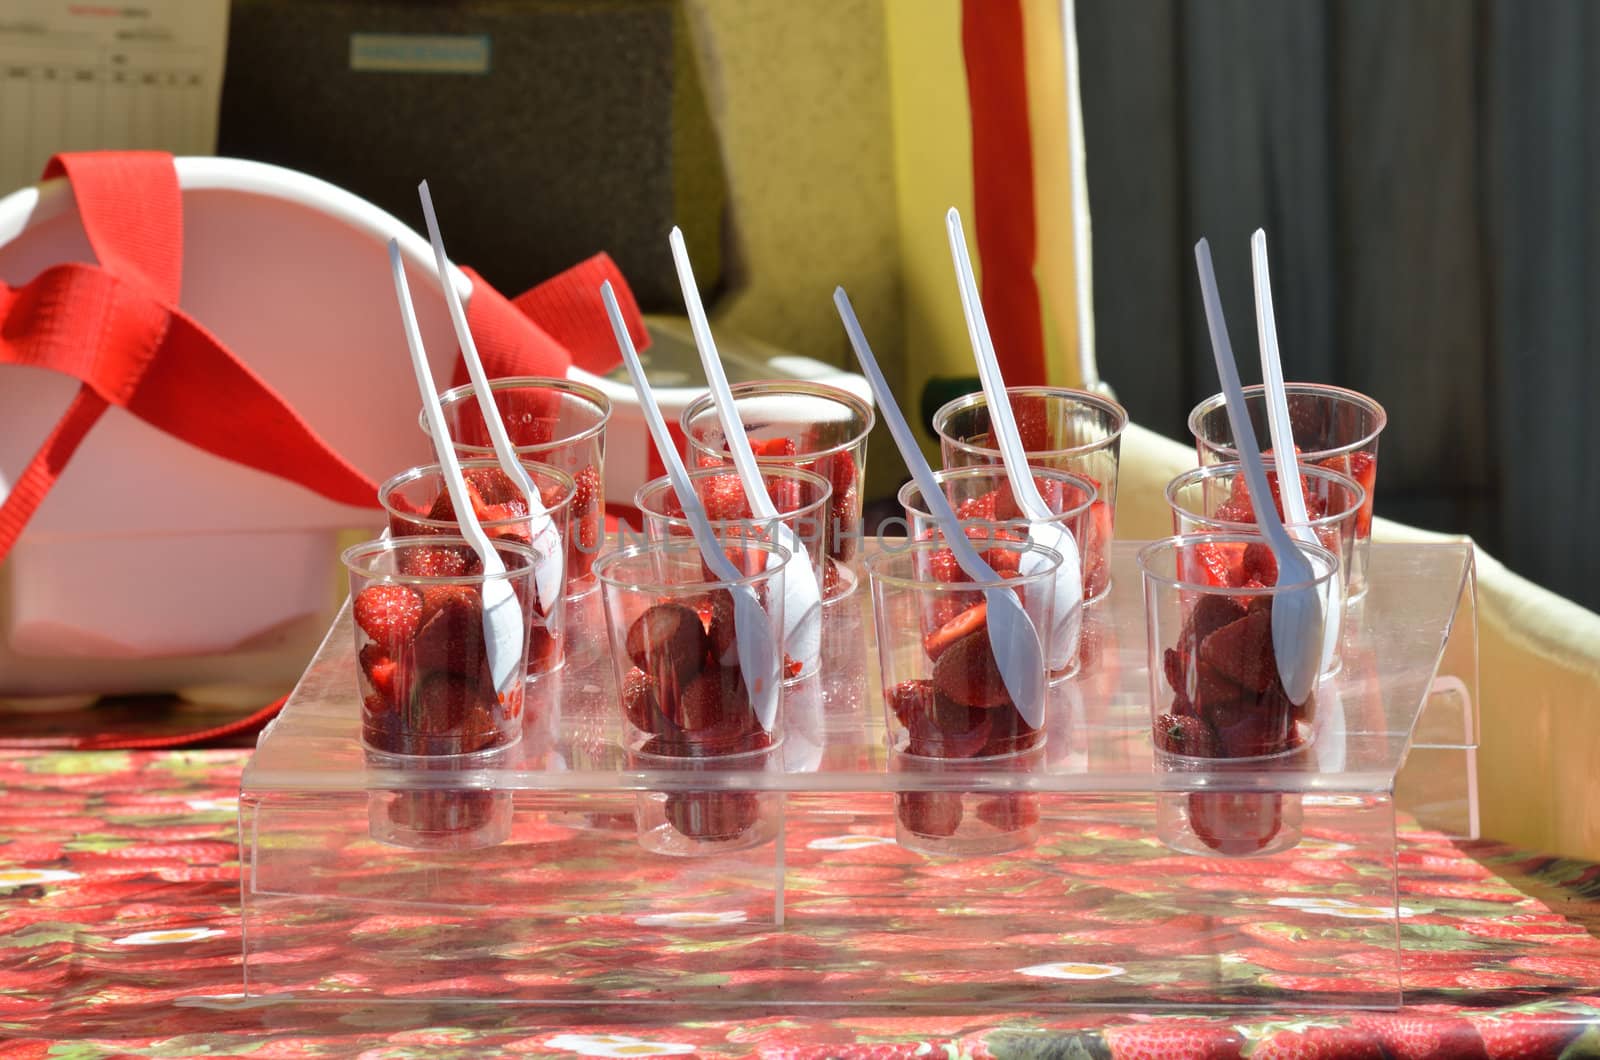 Strawberries in cups by pauws99